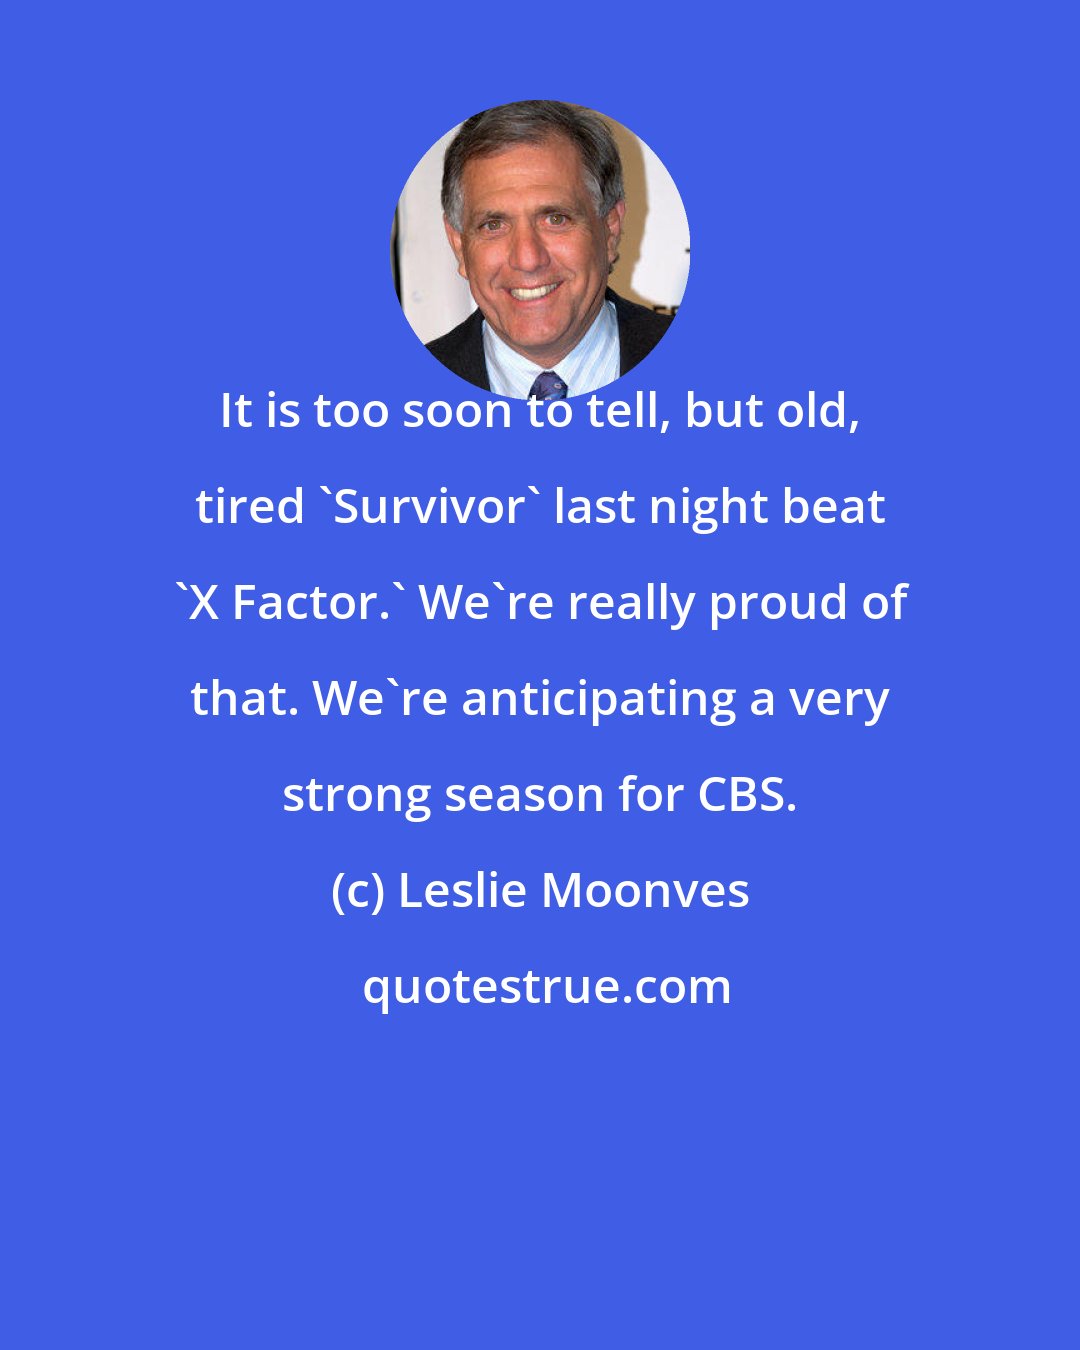 Leslie Moonves: It is too soon to tell, but old, tired 'Survivor' last night beat 'X Factor.' We're really proud of that. We're anticipating a very strong season for CBS.